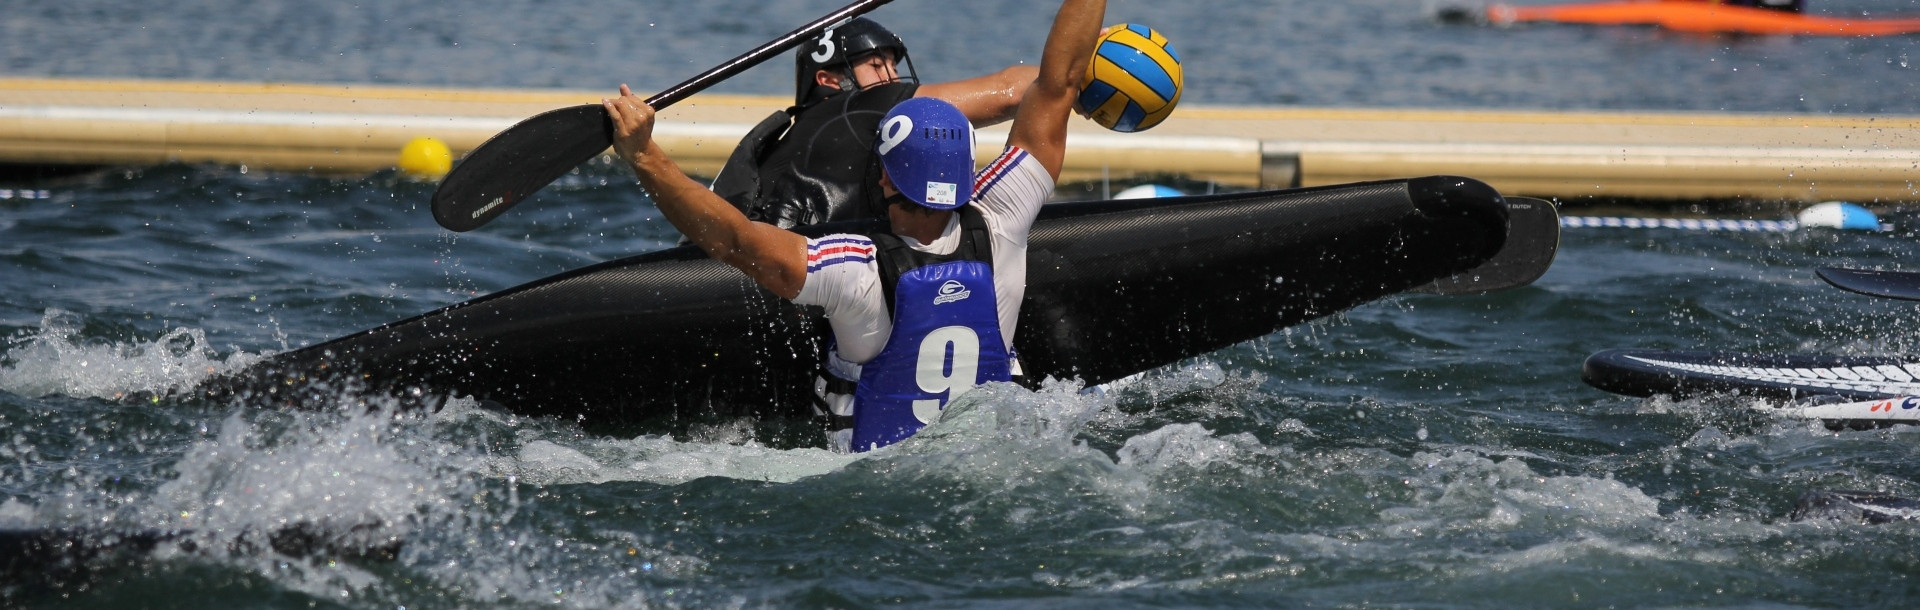 Action continued today at the ICF Canoe Polo World Championships in Welland in Canada ©ICF/Eric Vignet